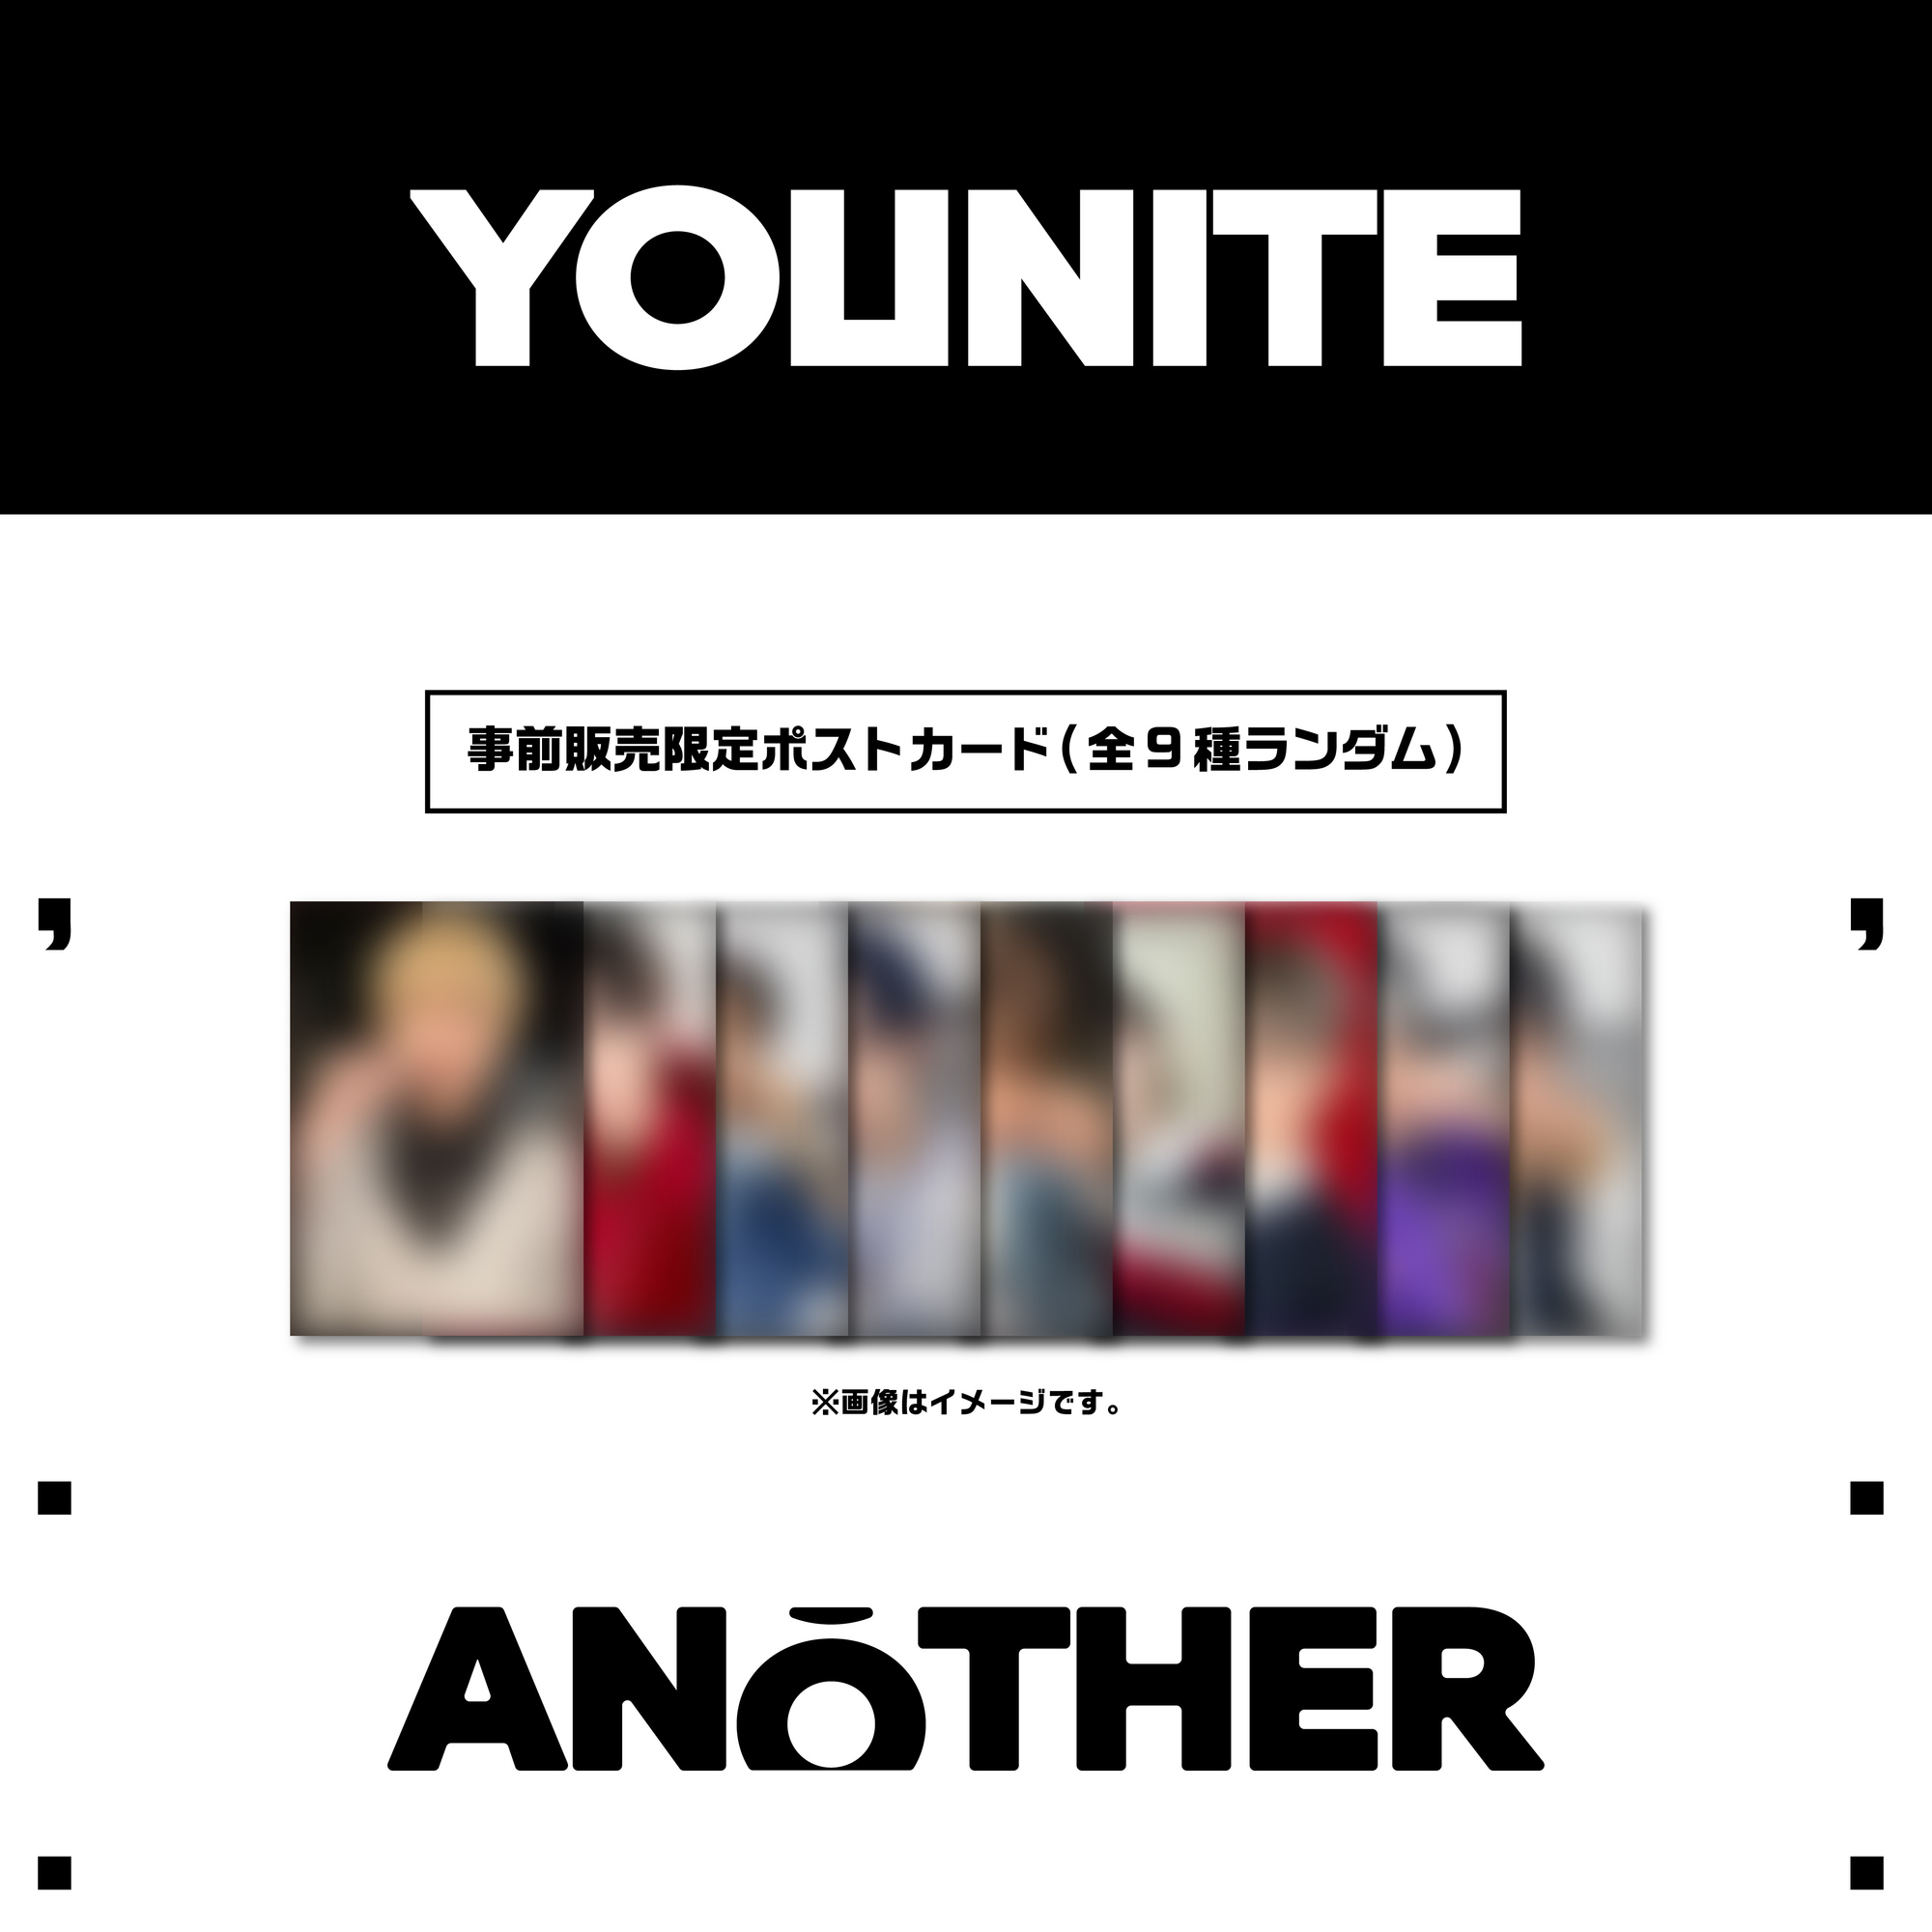 YOUNITE 6TH EP 「ANOTHER」 発売記念プロモーションイベント開催決定